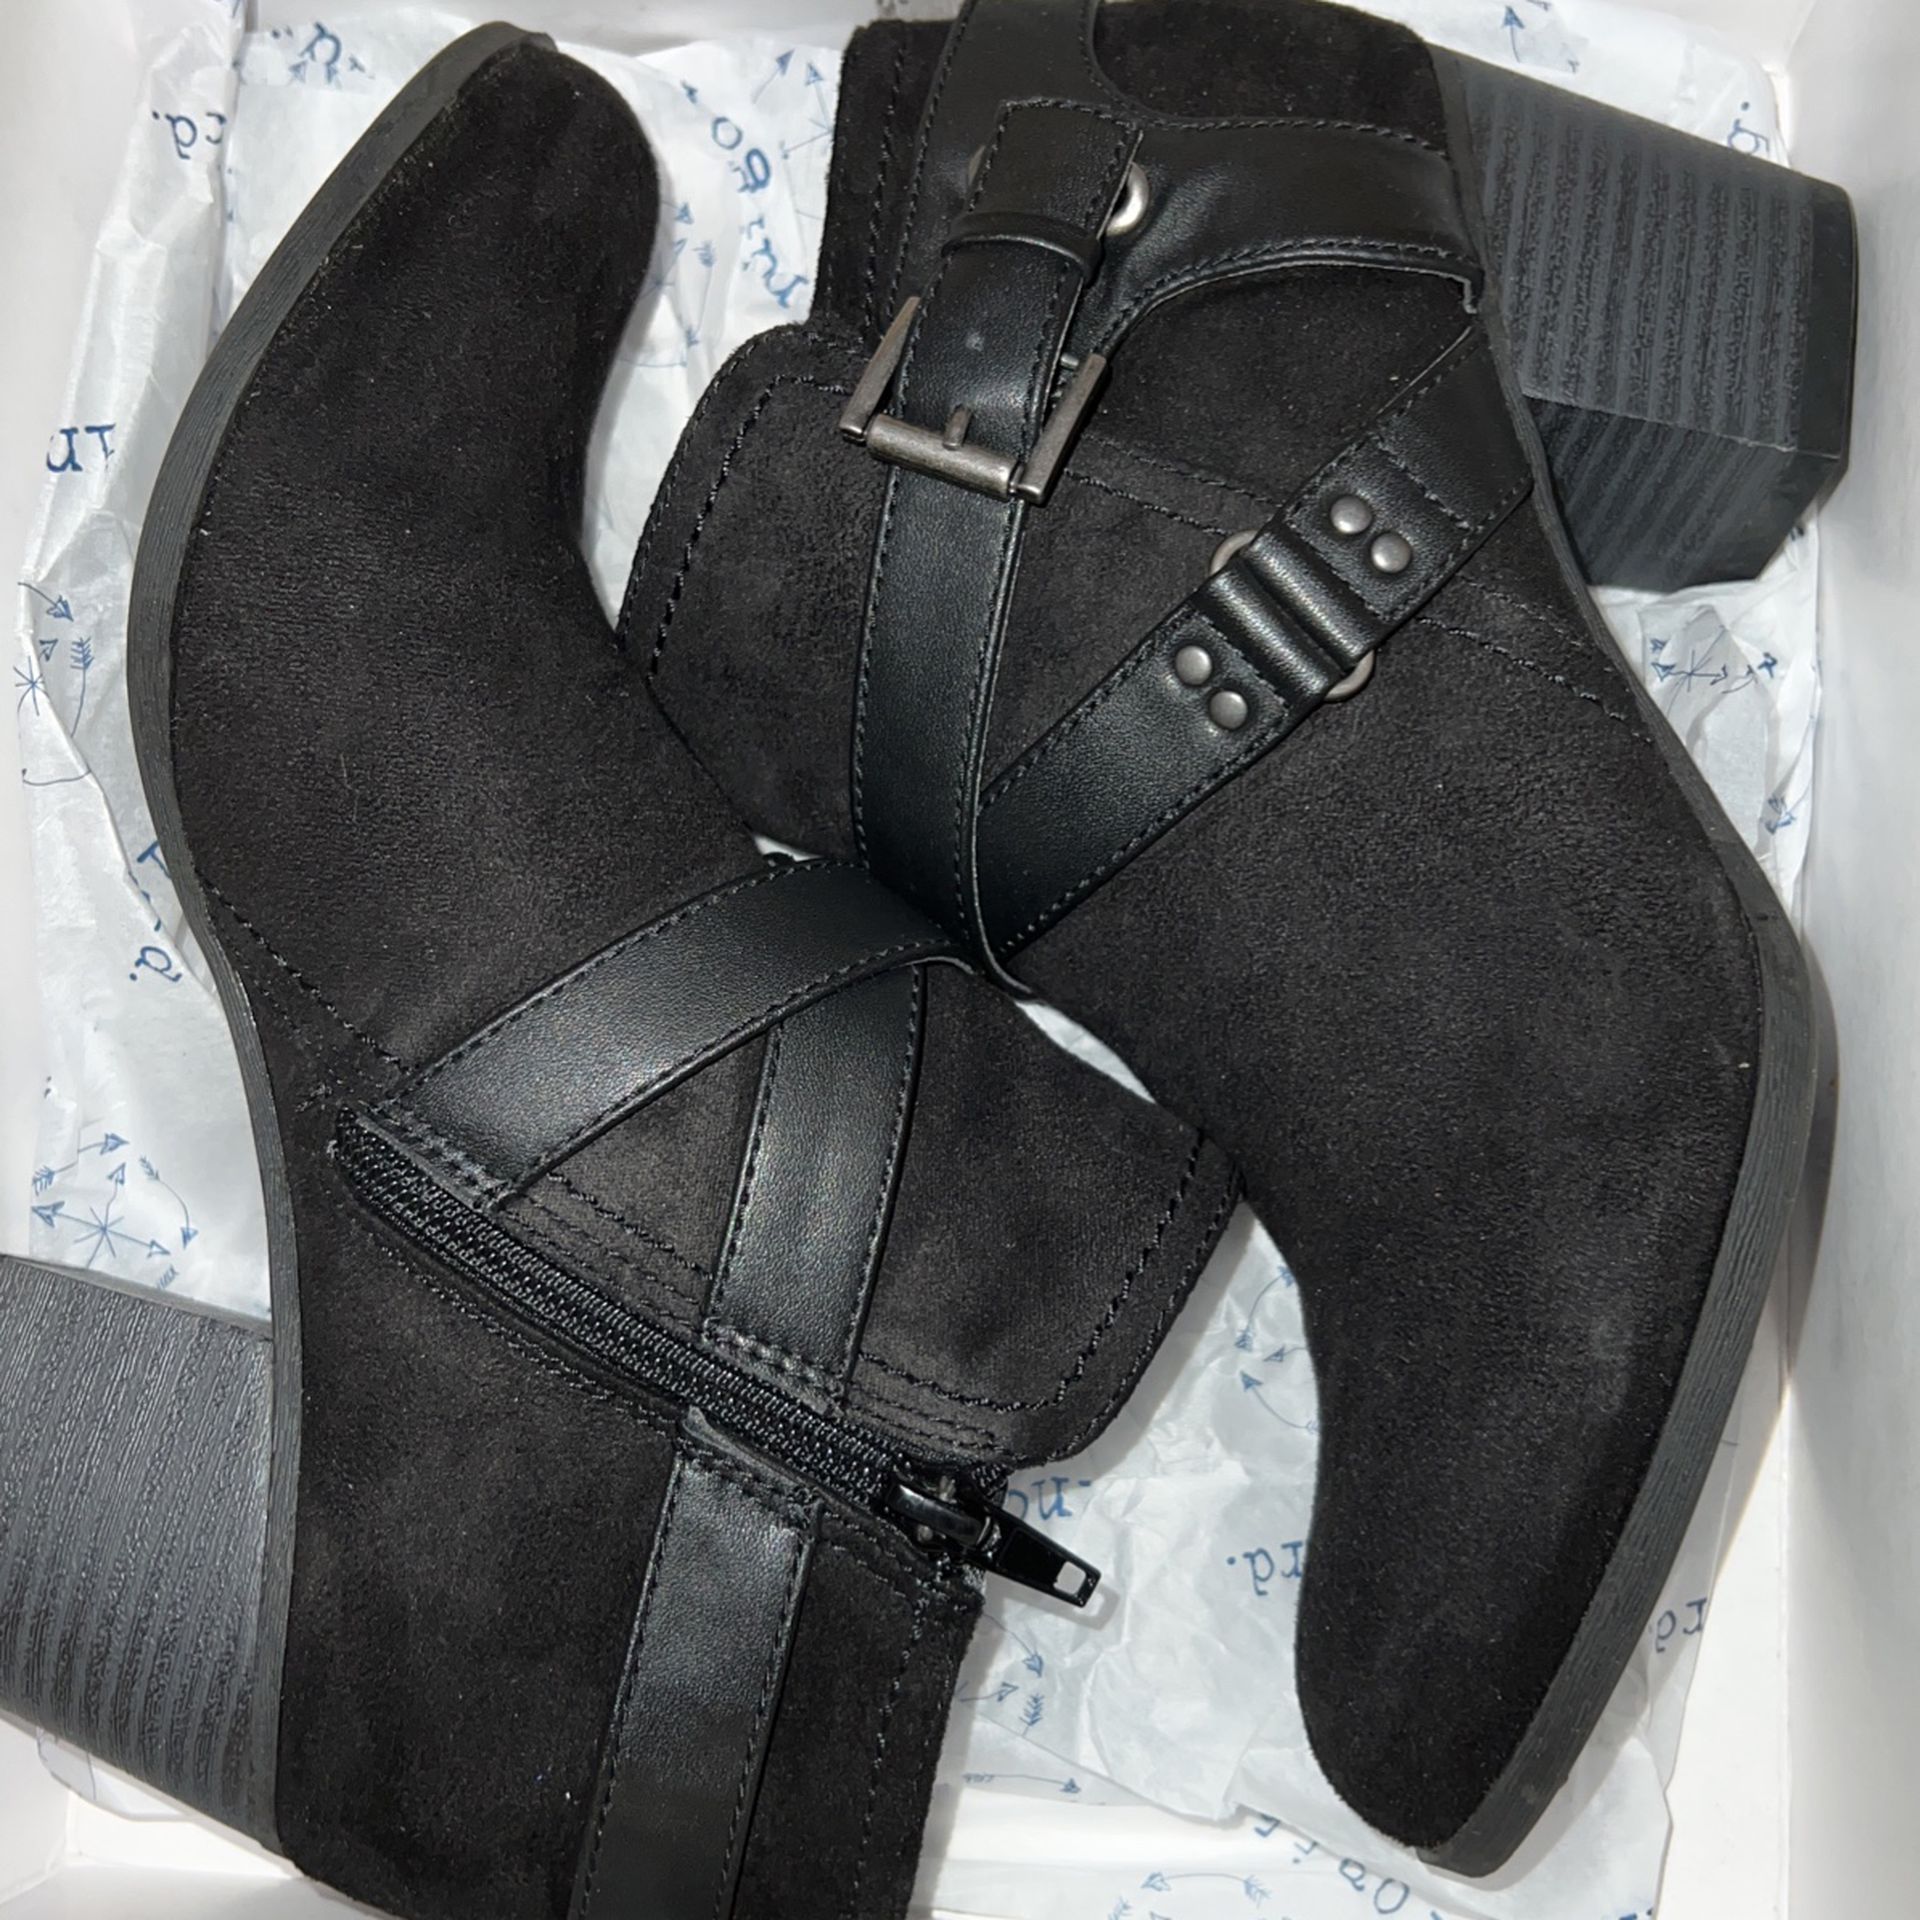 Black Ankle Boots With Zipper. $15